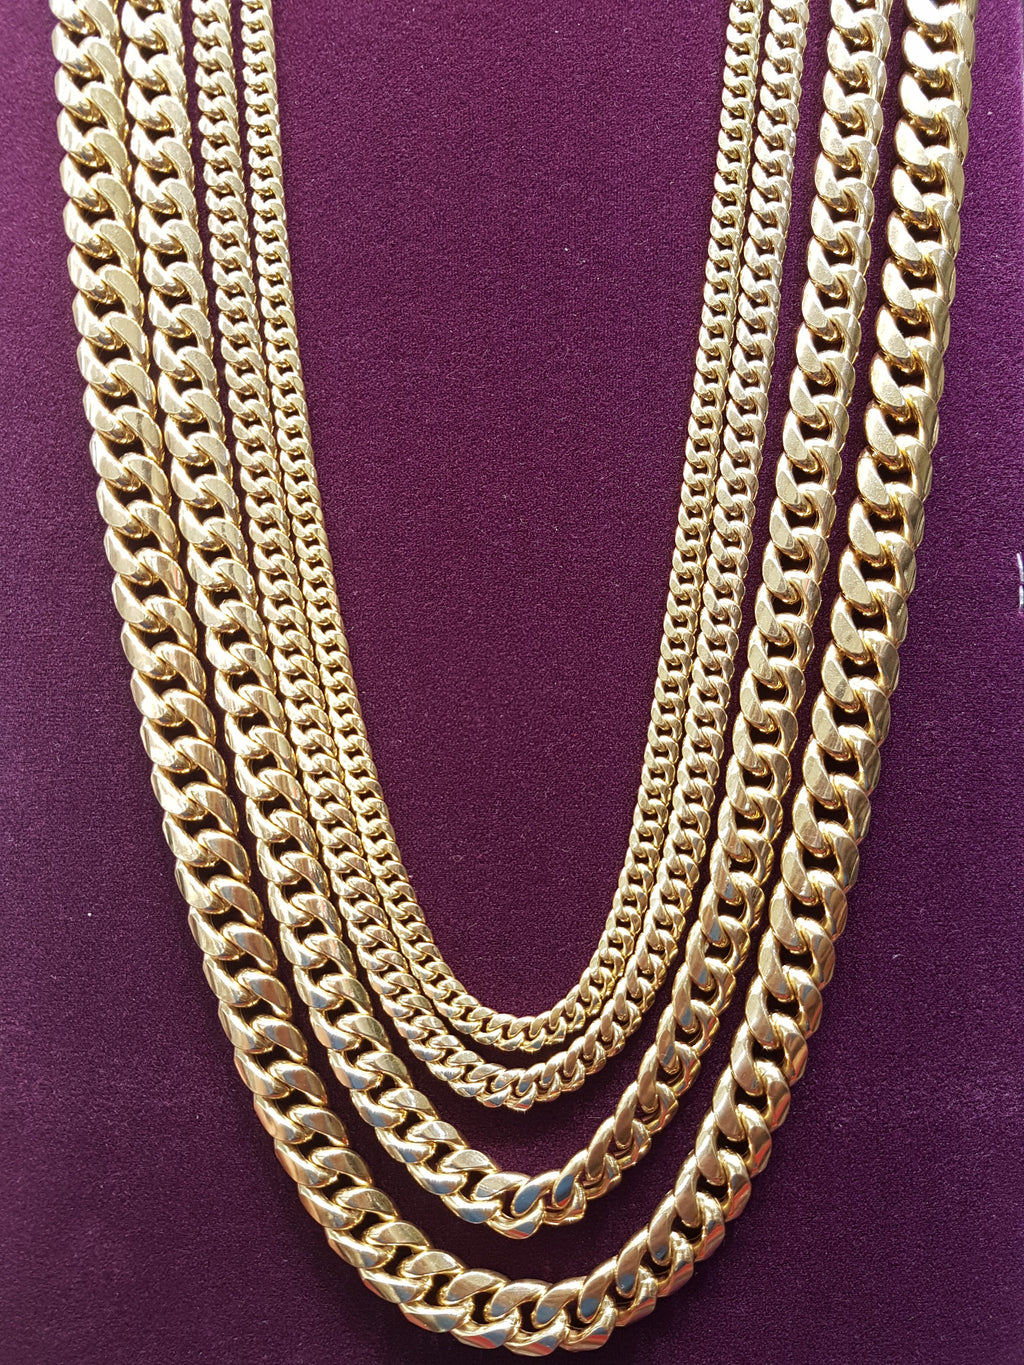 Gold plated link chain necklace with heart shaped lock and evil